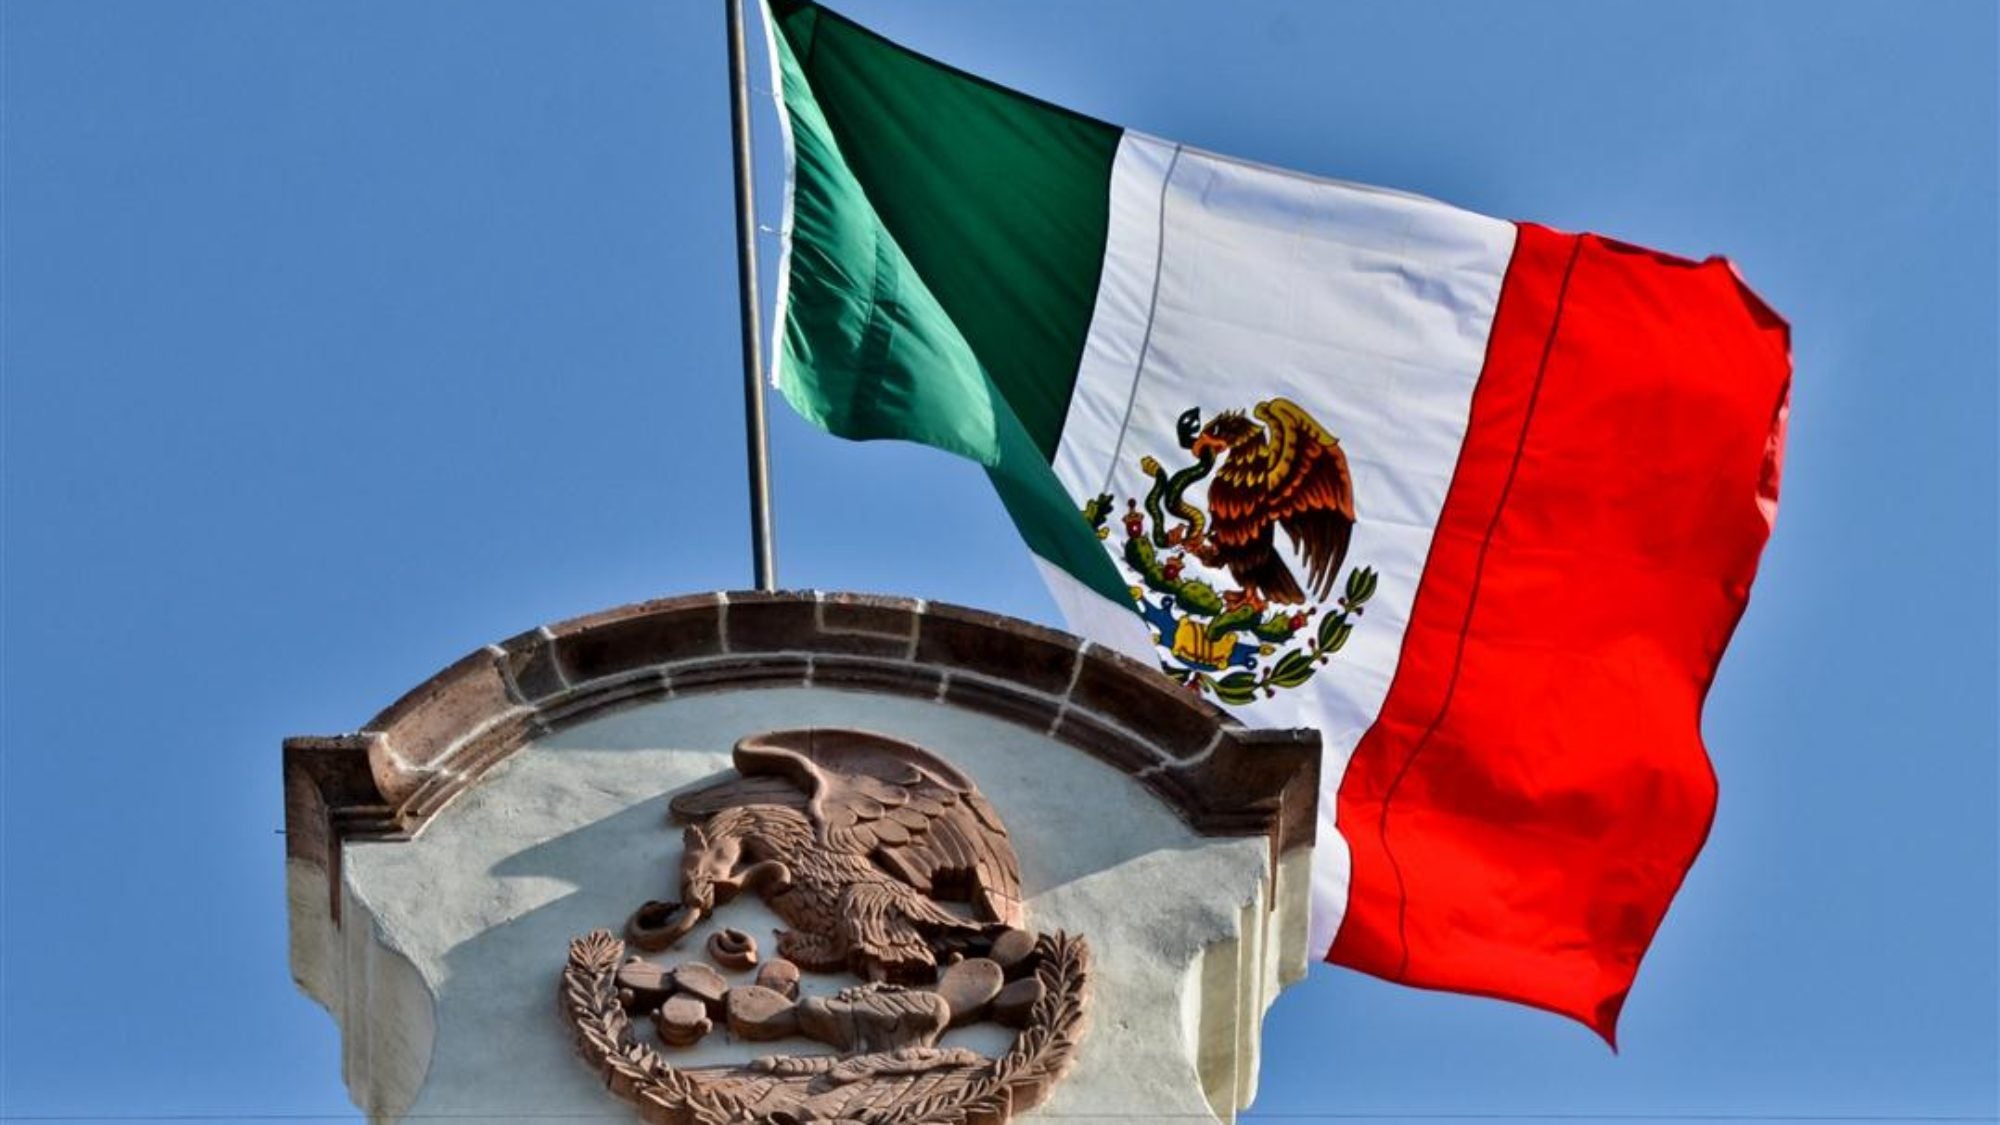 The Mexican flag on top of a building